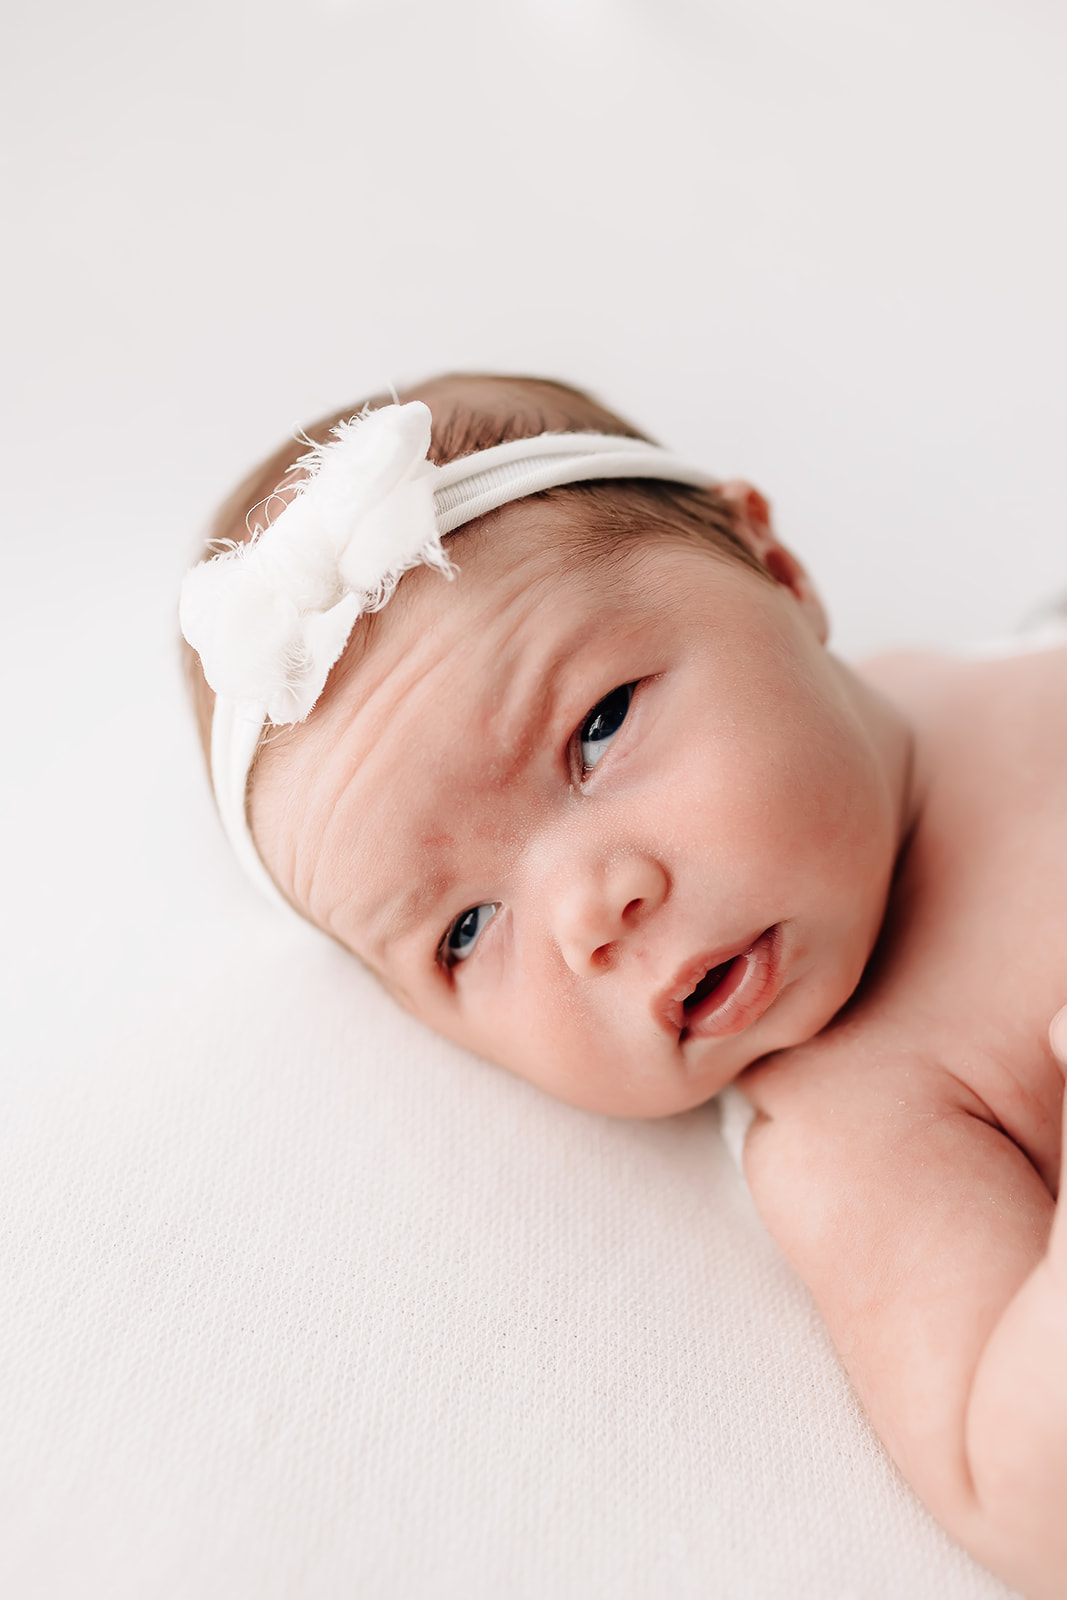 newborn baby lays on a white bed in a white headband with eyes open dancing for birth